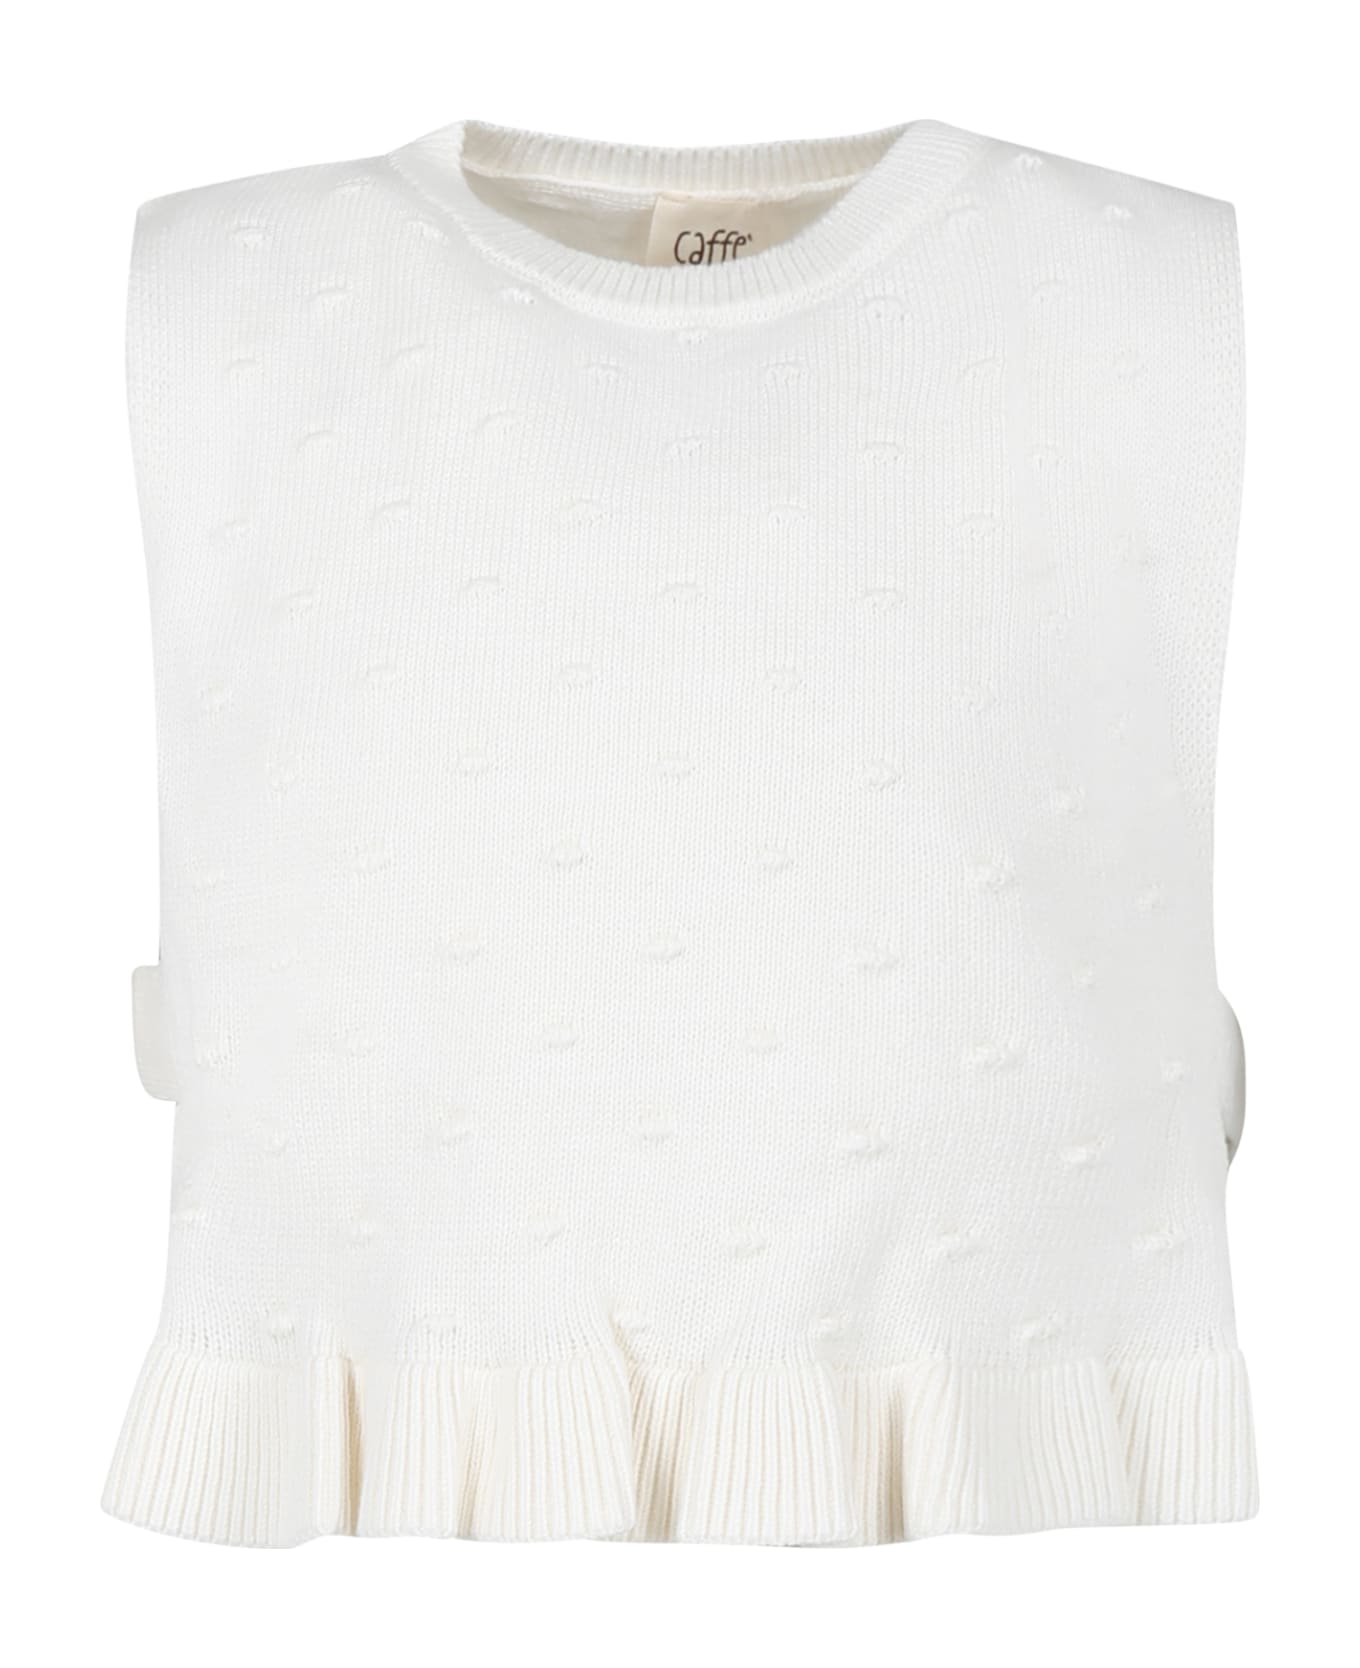 Caffe' d'Orzo White Top For Girl - White トップス